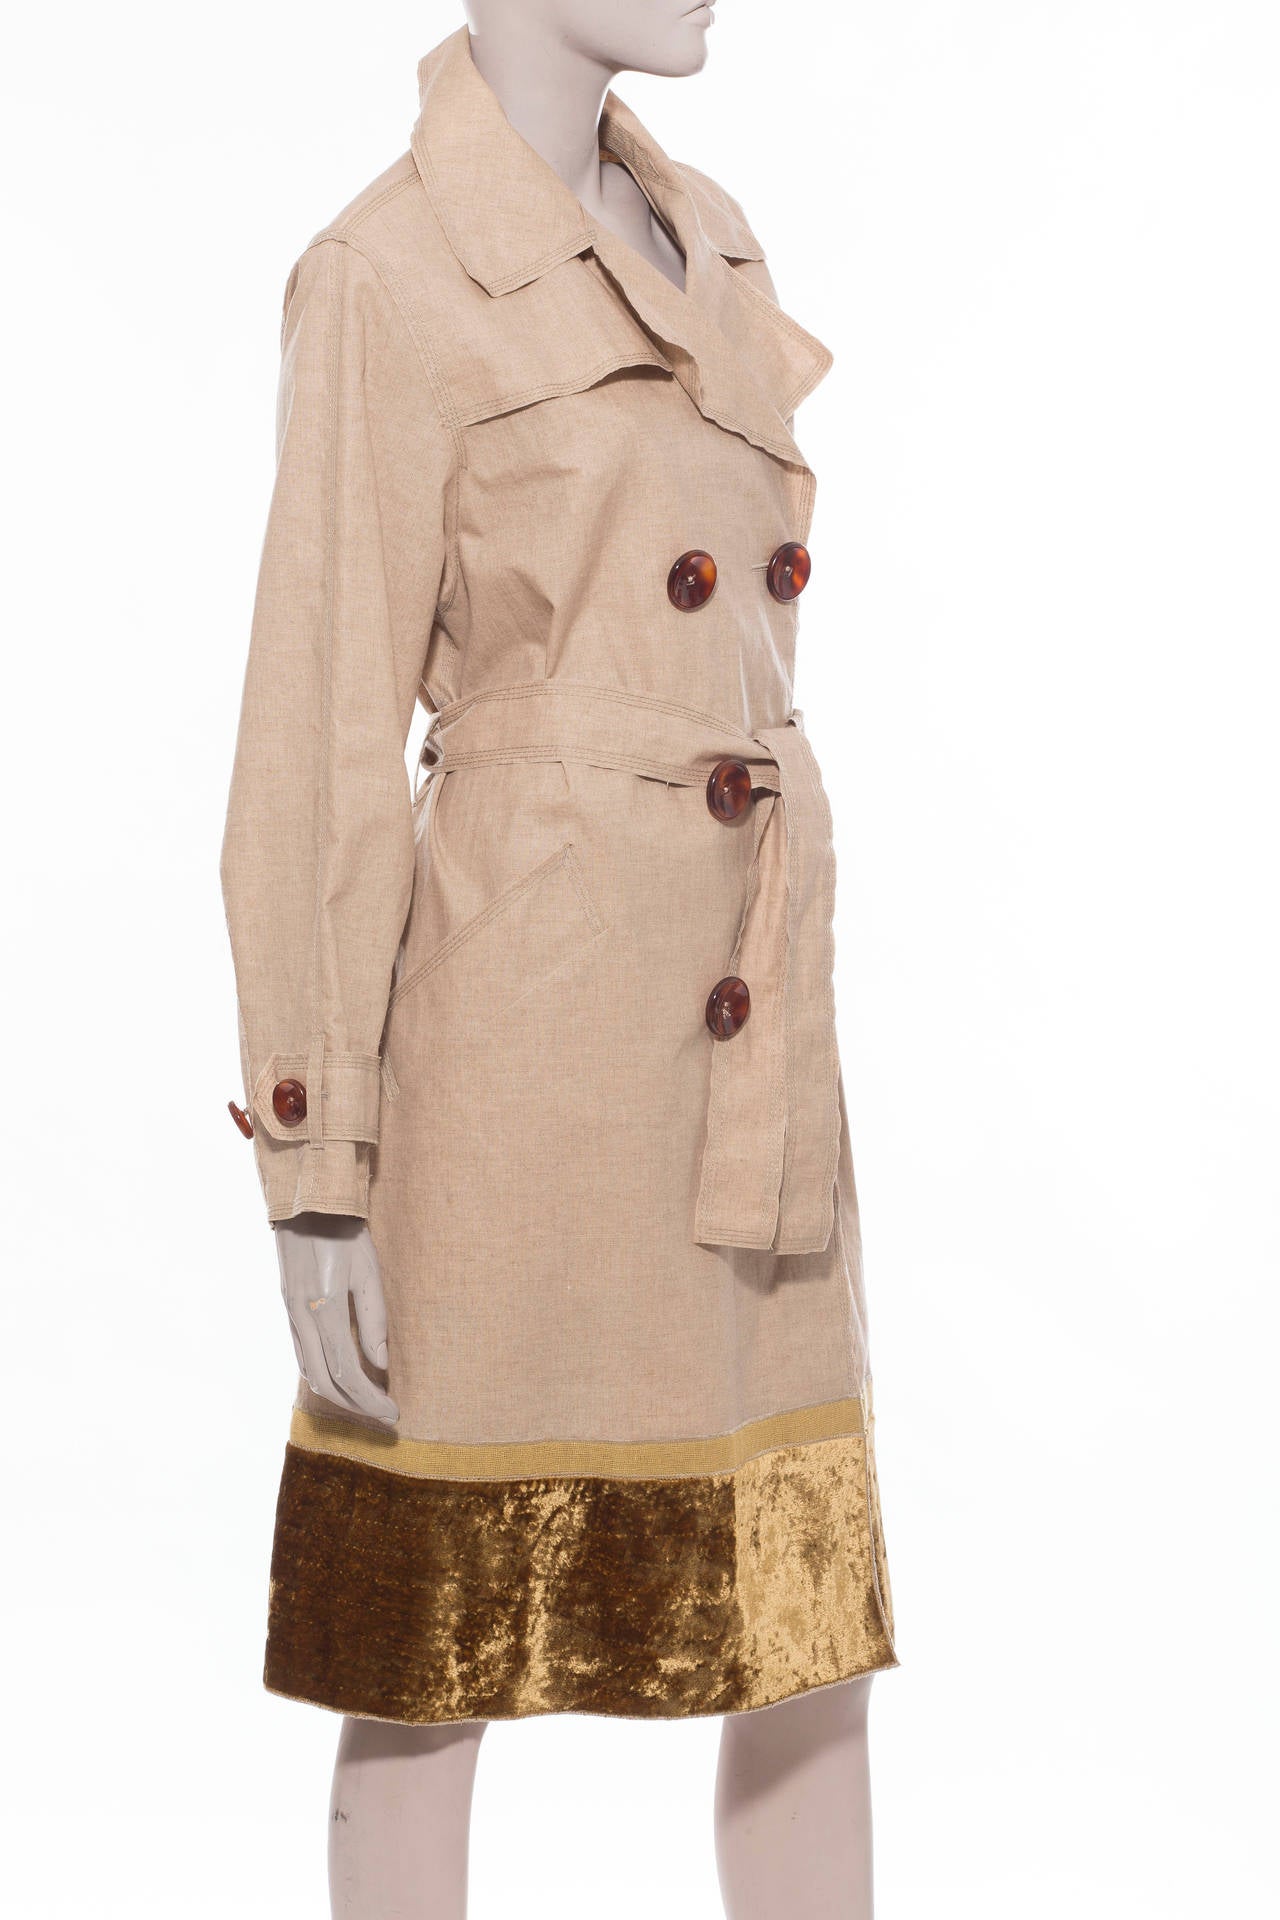 Marc Jacobs for Louis Vuitton,  coated linen, double-breasted coat with notched collar, slit pockets at sides, velvet trim at hem, tie at waist and front button closure.

Bust 44”, Waist 48”, Shoulder 17”, Length 40”